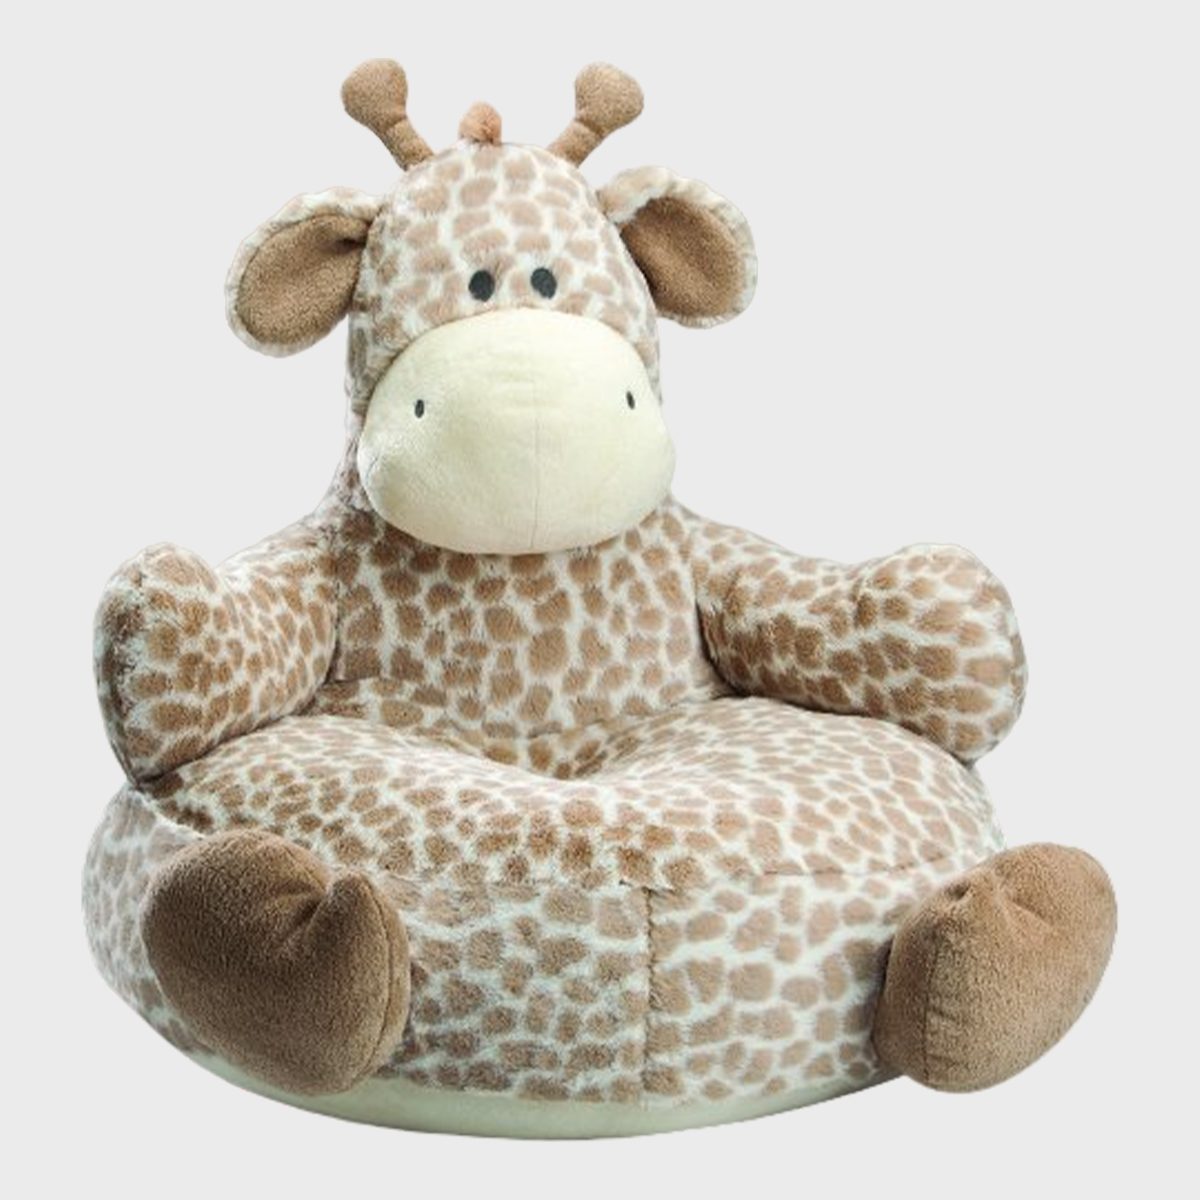 <p>This smile-worthy <a href="https://www.amazon.com/Nat-Jules-Jordan-Giraffe-Chair/dp/B00DUGECPU" rel="nofollow noopener noreferrer">plush chair</a> adds so much happiness to any nursery and offers years of grow-with-baby fun. It's a soft neutral piece that's safe for crawling babies and early walkers, thanks to no sharp edges, and it will become a treasured <a href="https://www.rd.com/article/10-tips-to-make-reading-fun-for-your-child/">reading chair</a> and play seat over time.</p> <p class="listicle-page__cta-button-shop"><a class="shop-btn" href="https://www.amazon.com/Nat-Jules-Jordan-Giraffe-Chair/dp/B00DUGECPU">Shop Now</a></p>